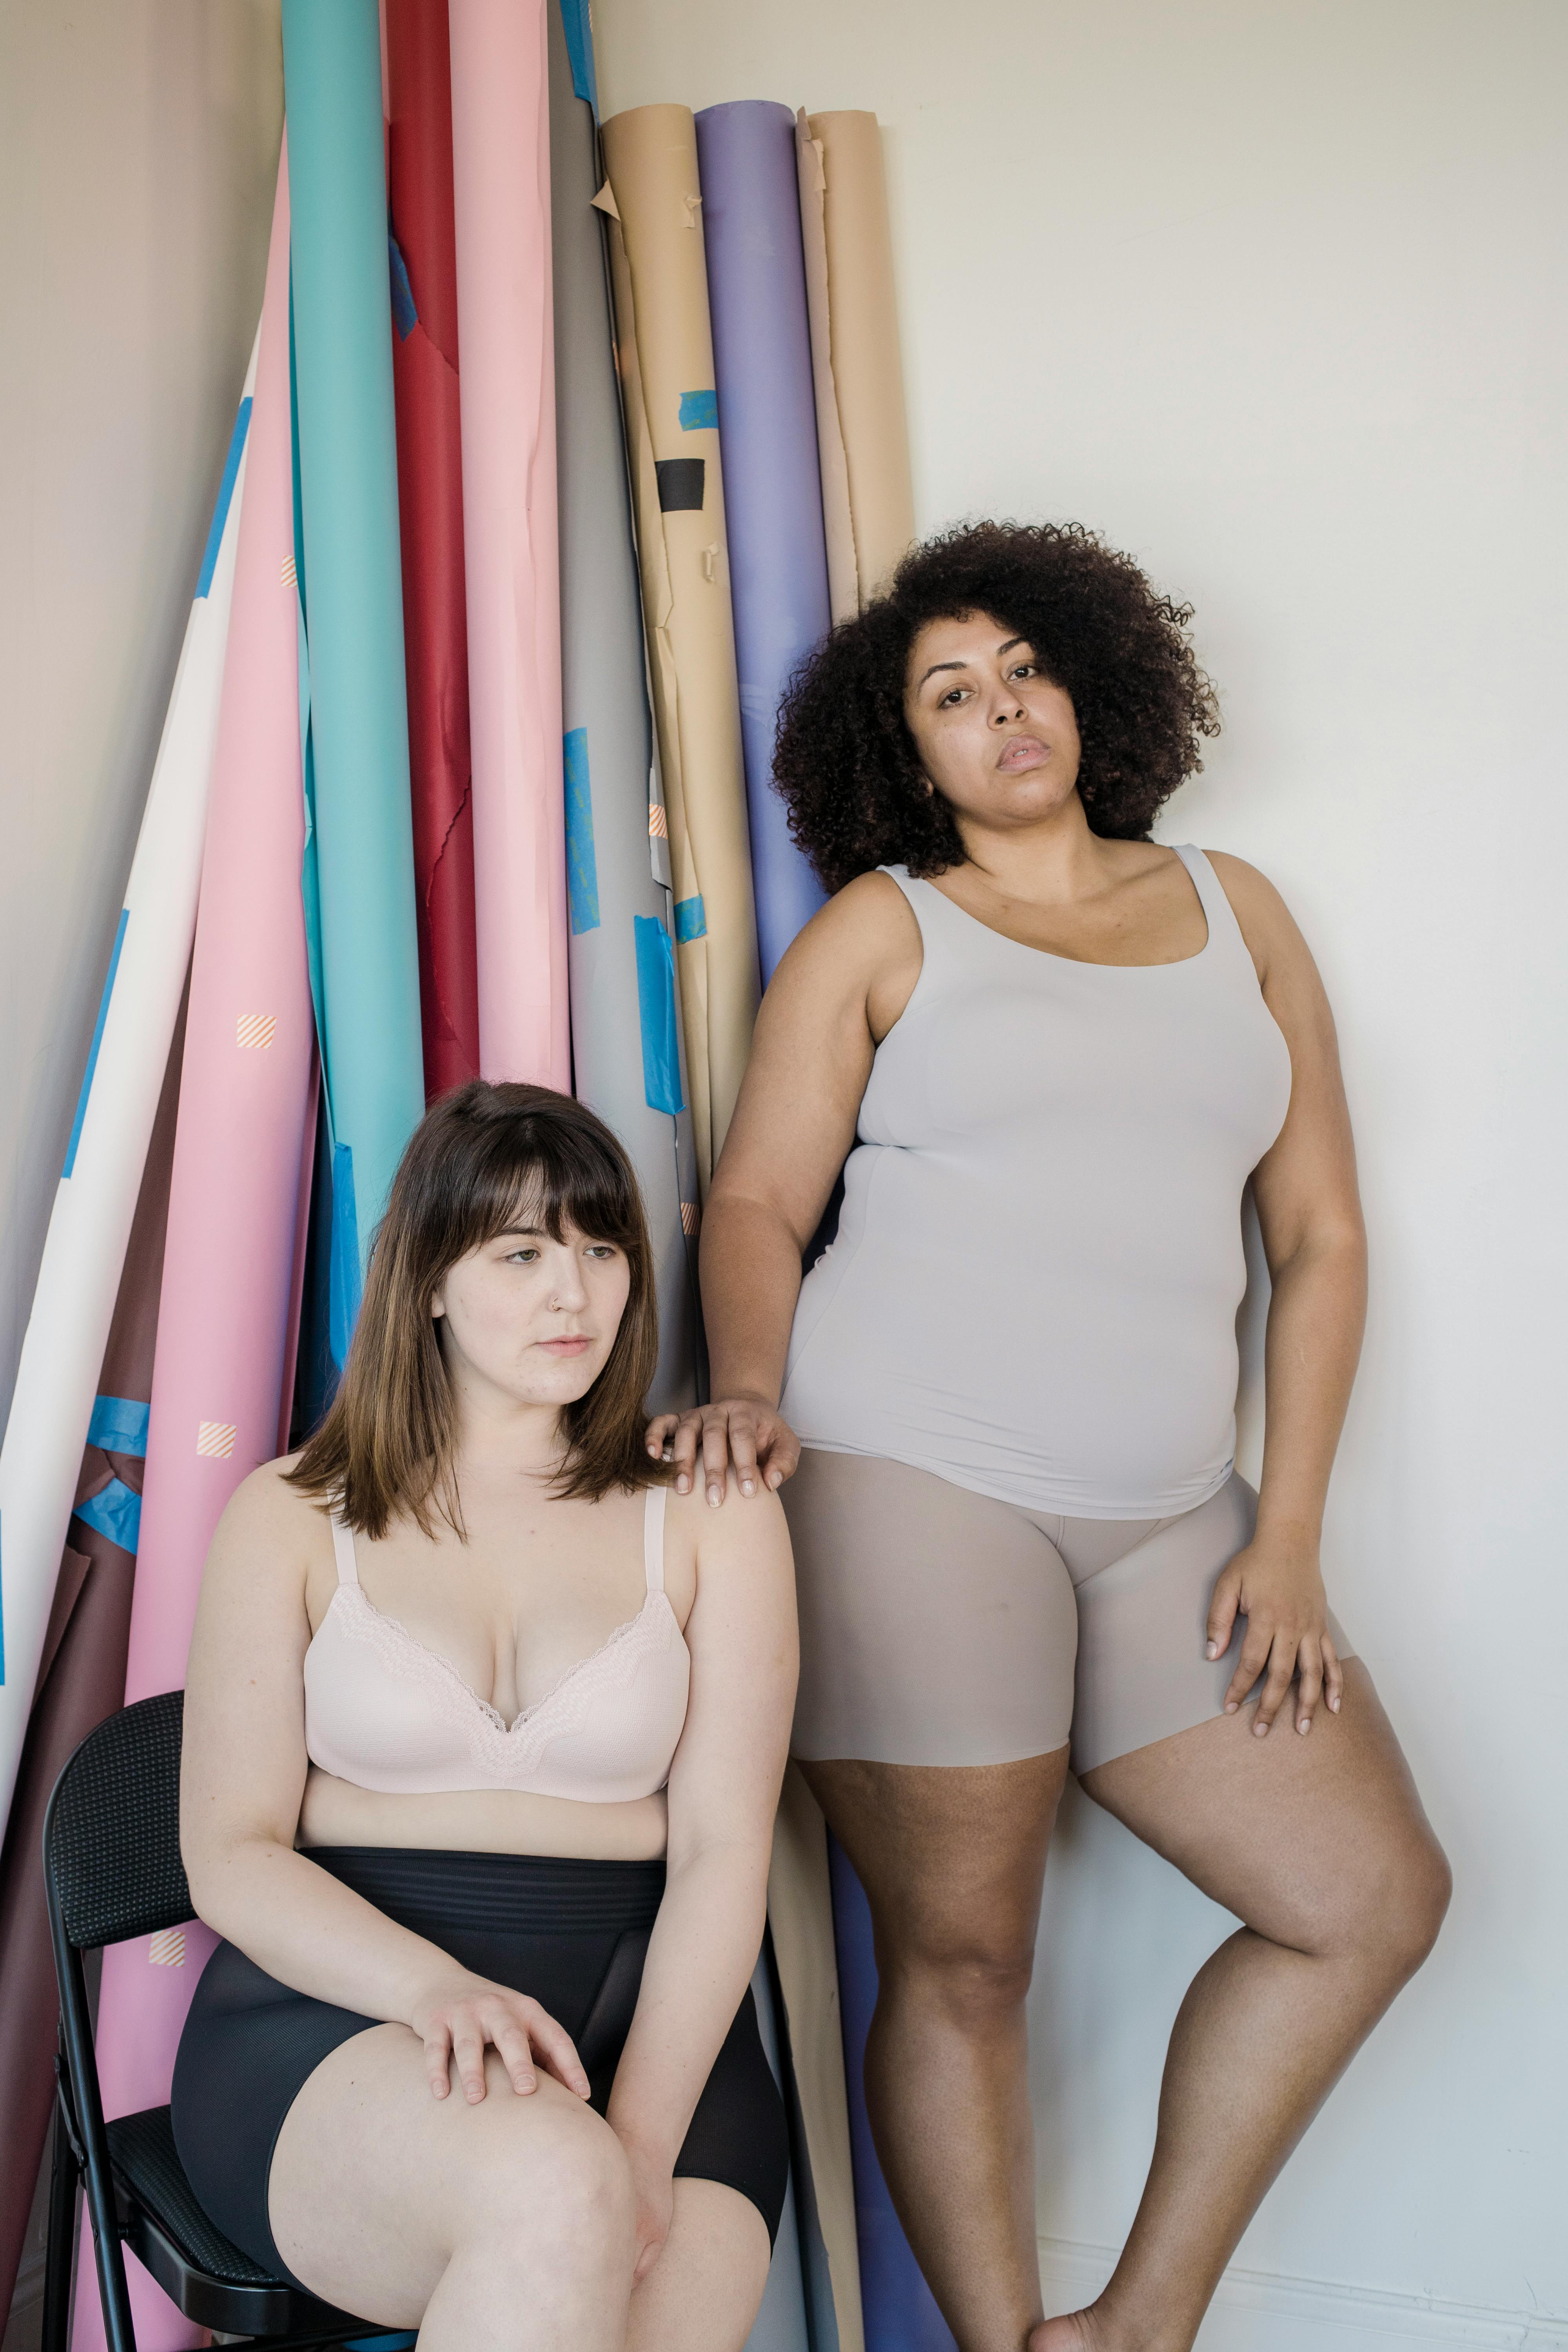 Overweight diverse girlfriends in underclothes against paper rolls